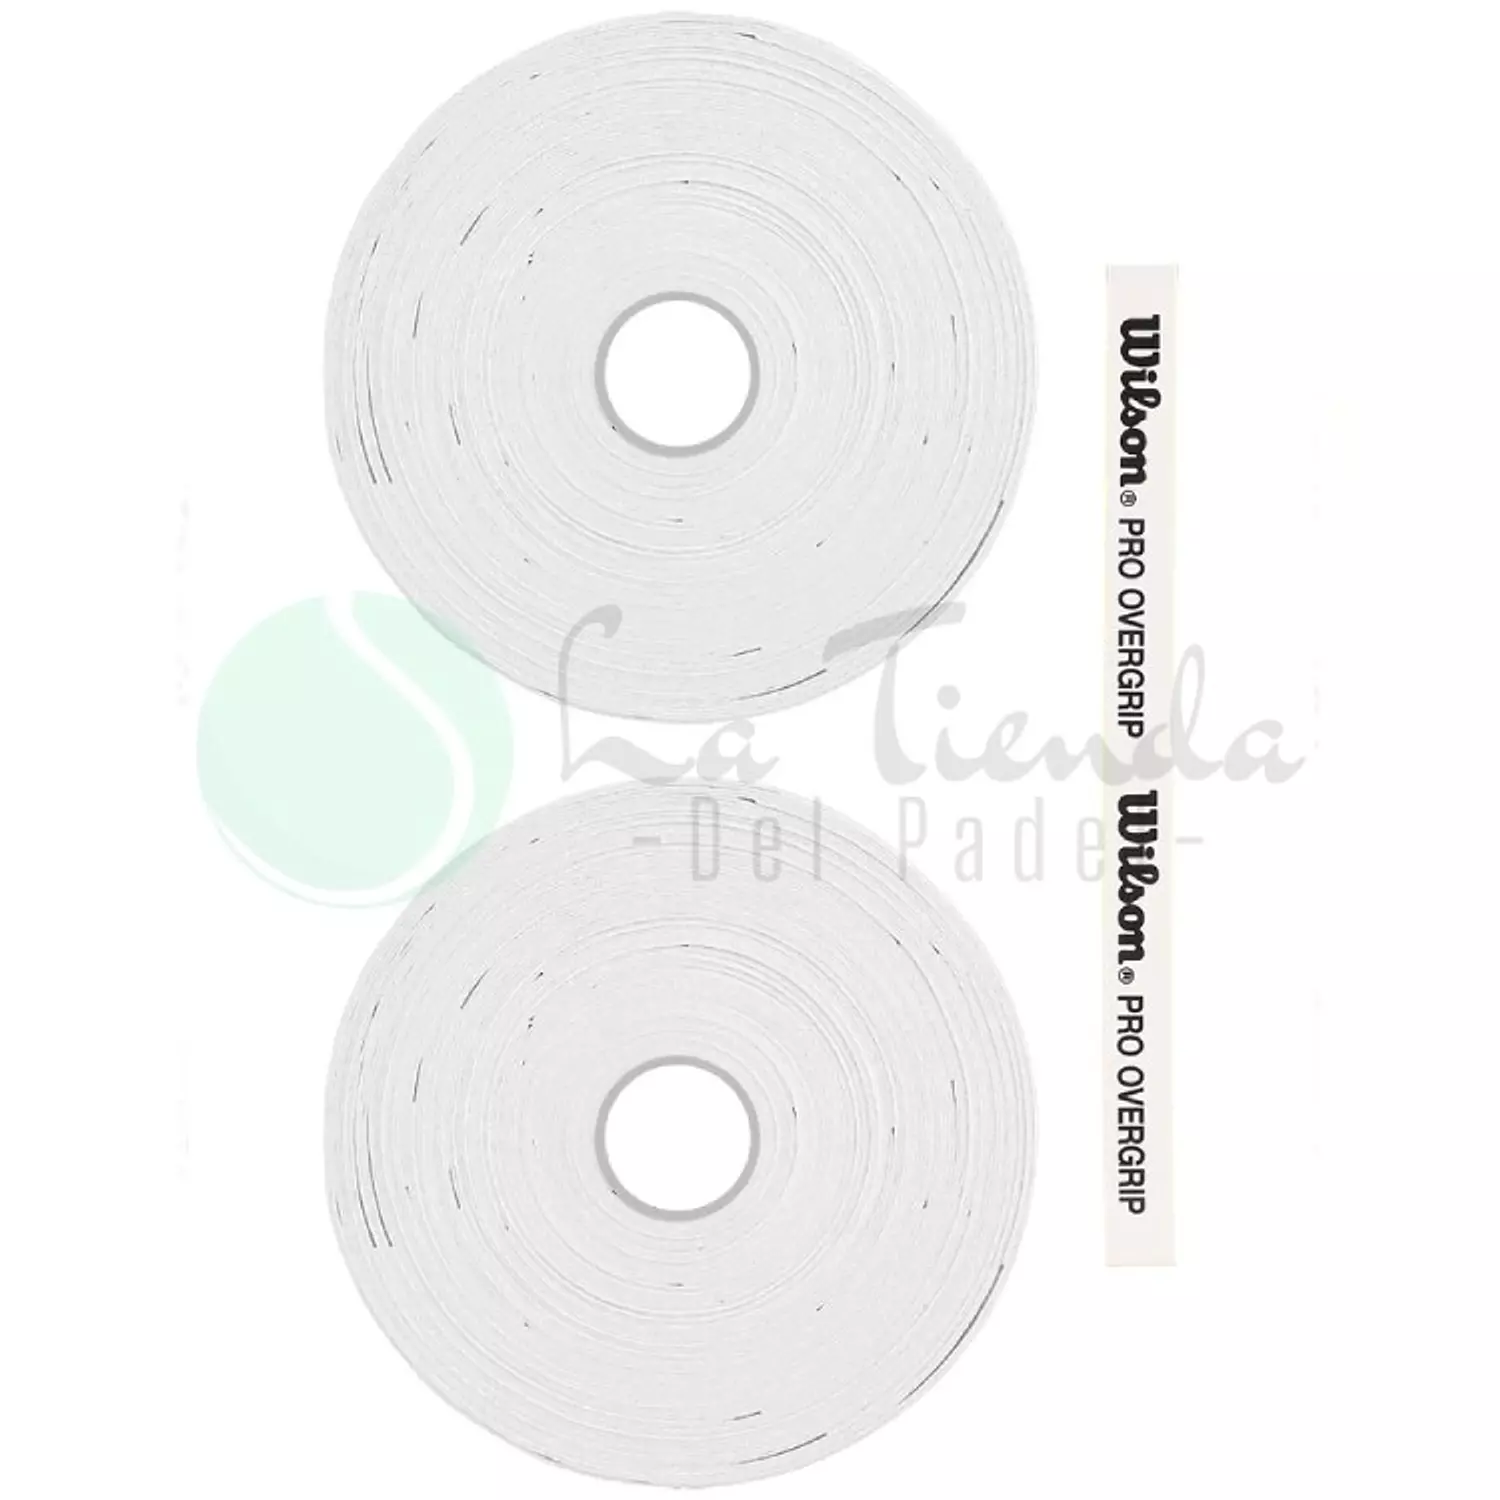 Wilson Pro Comfort White Overgrip (Pack of 2 reels) hover image